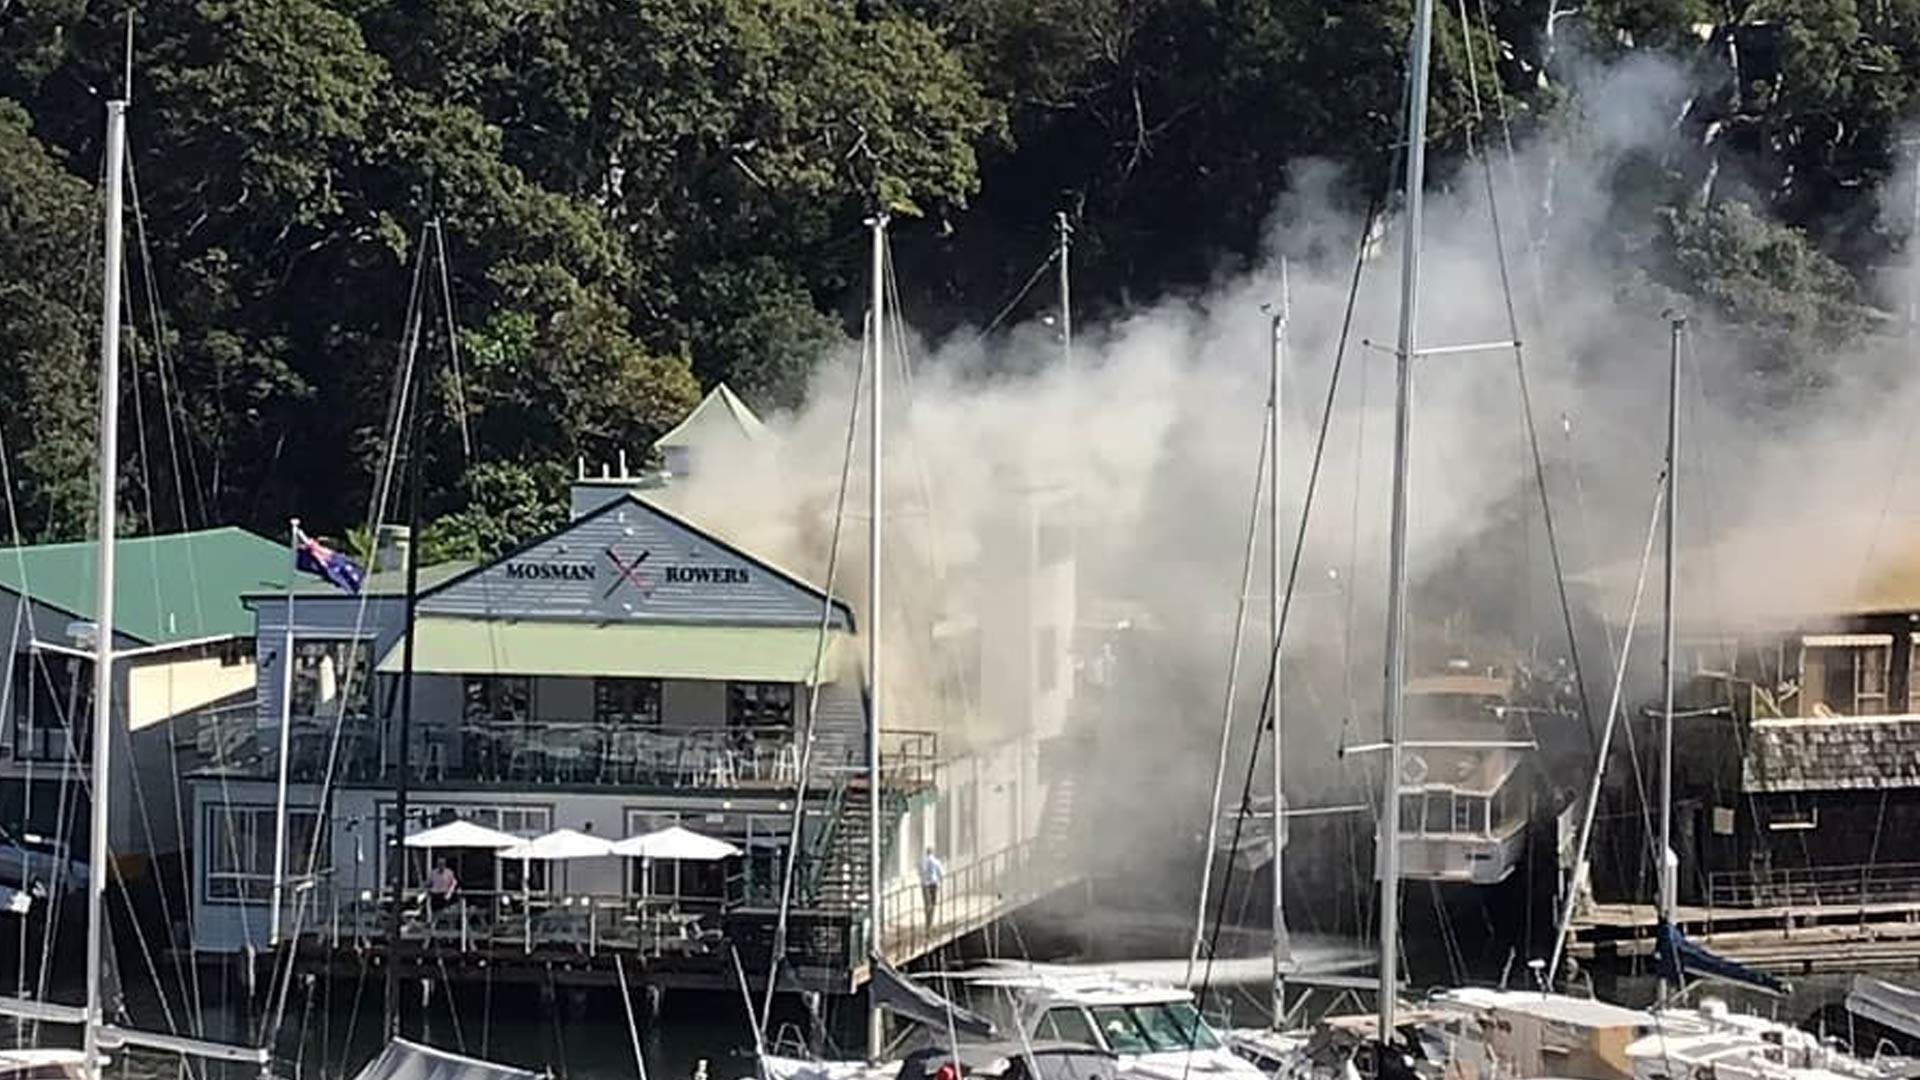 A Fire Has Partially Destroyed the Newly Reopened Mosman Rowers